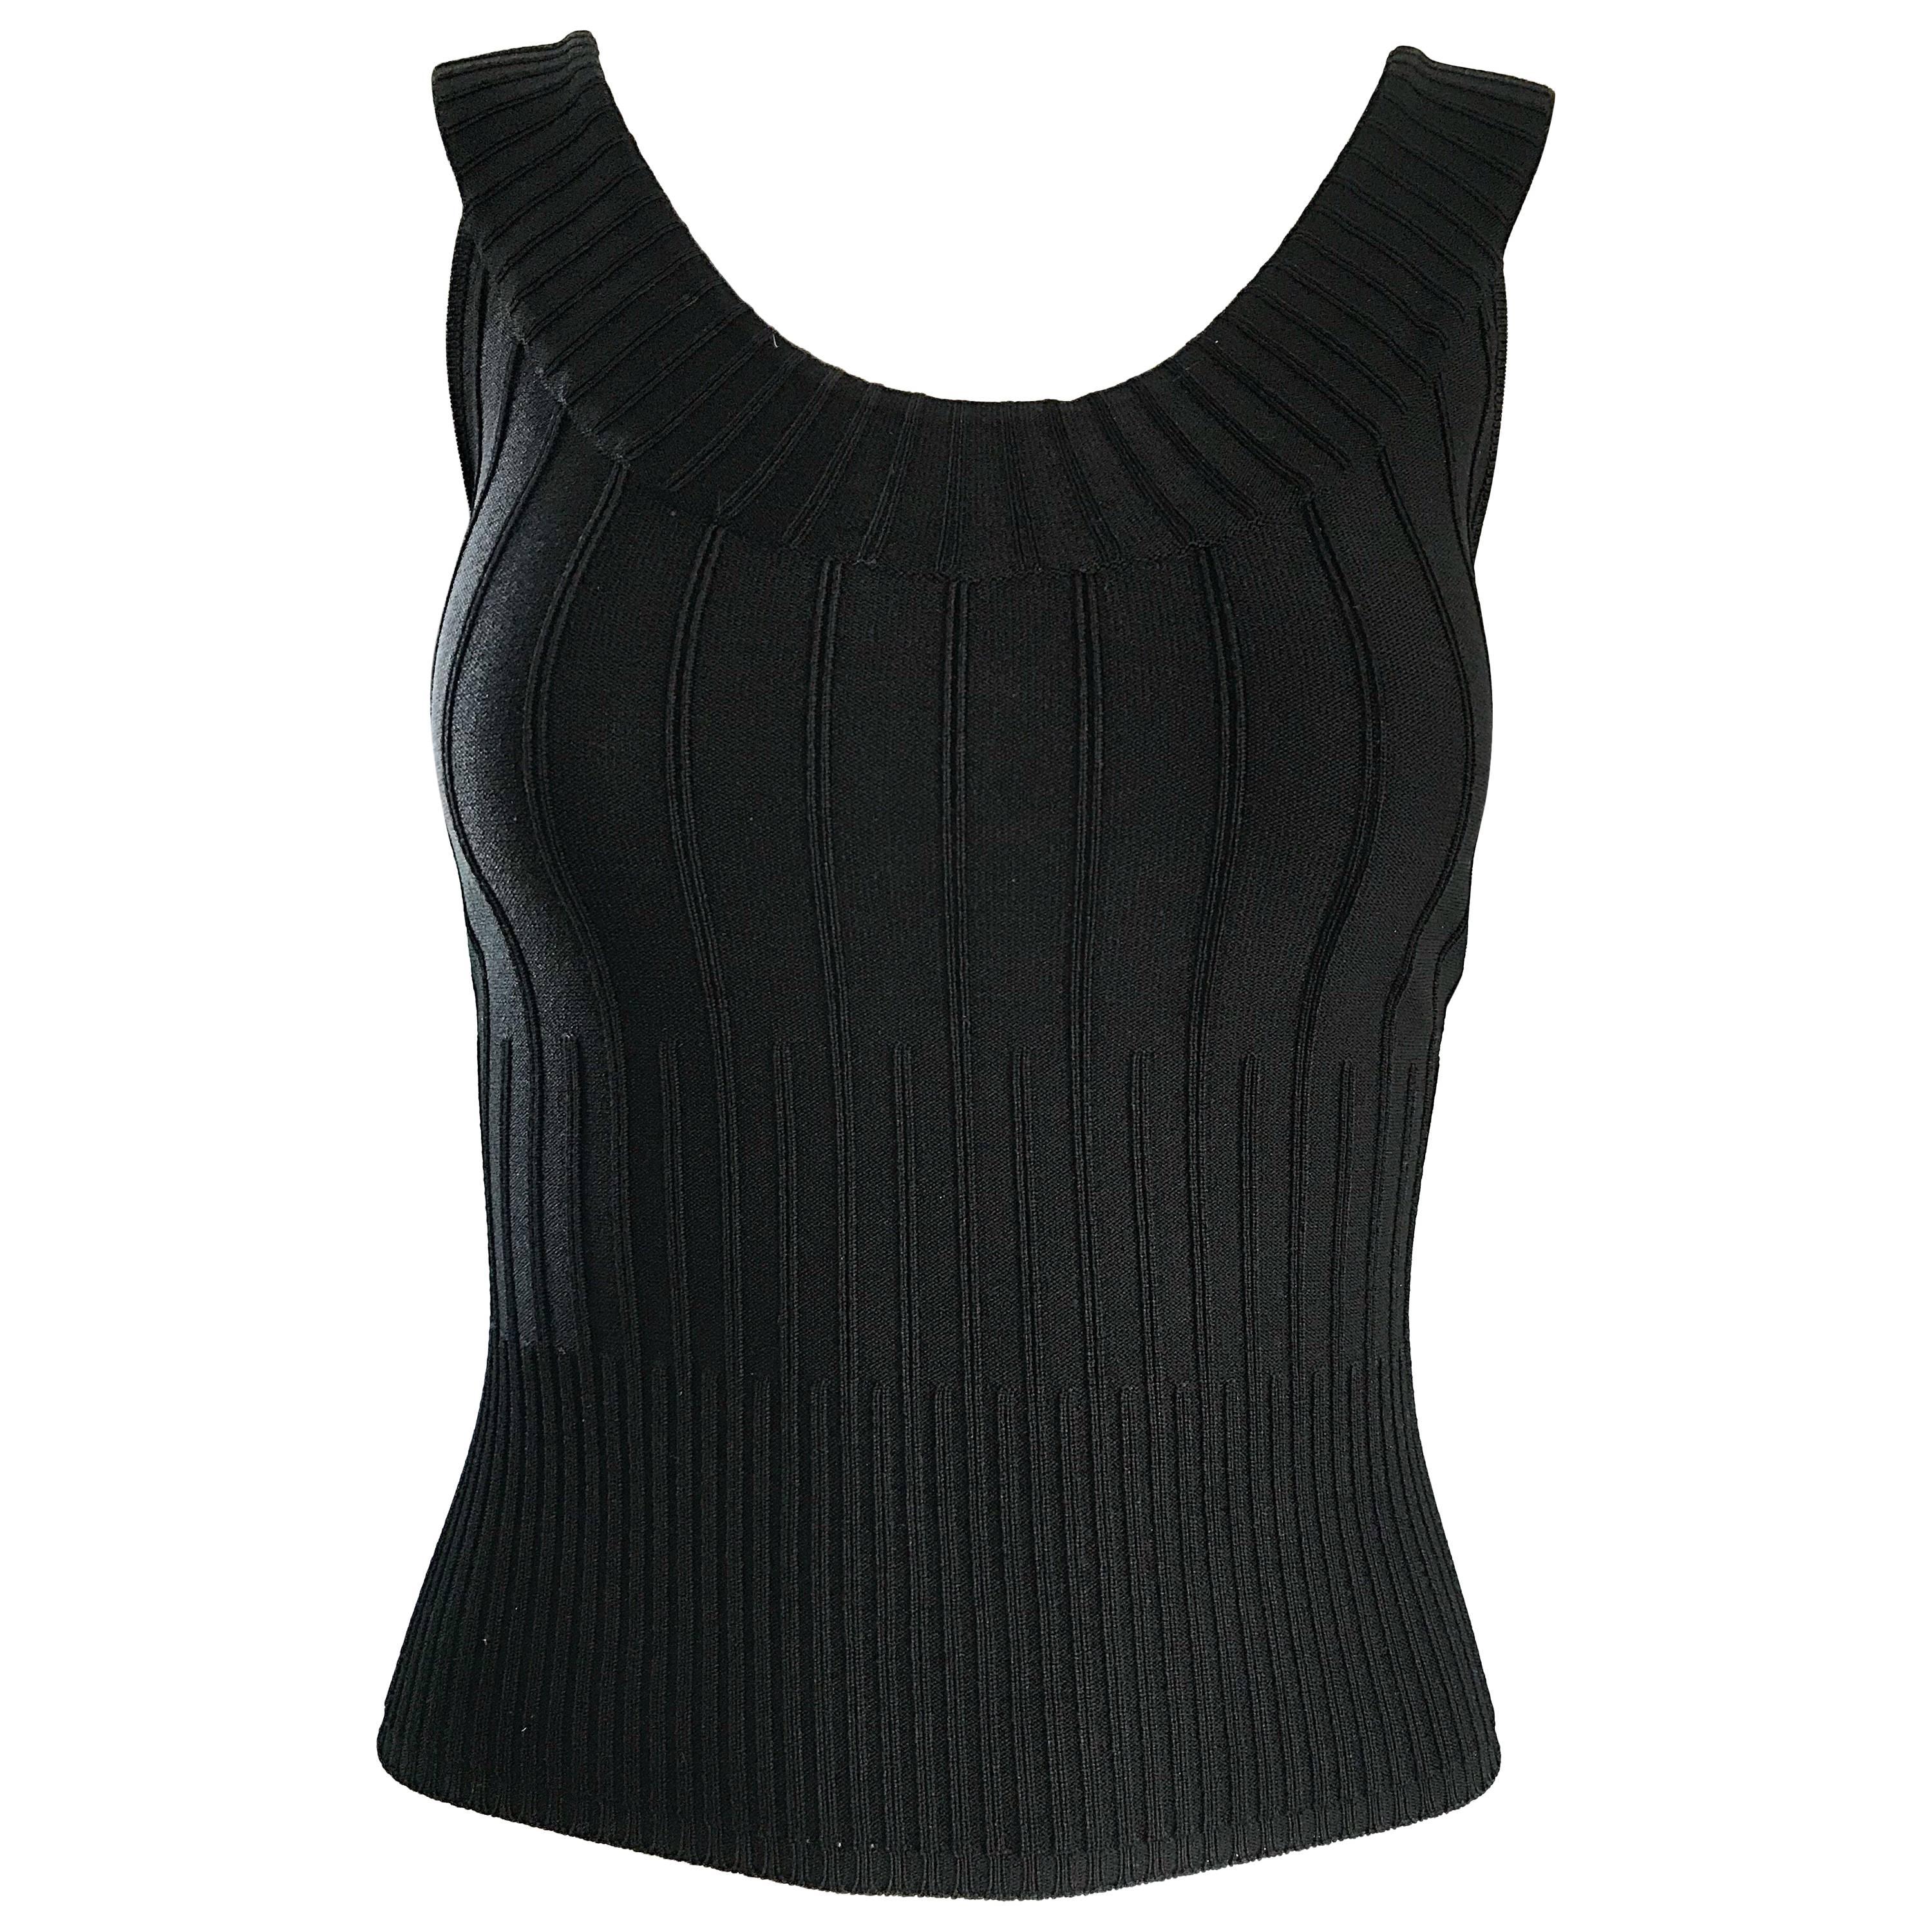 Thierry Mugler Couture 1990s Black Ribbed Sleeveless Vintage 90s Crop Top Shirt